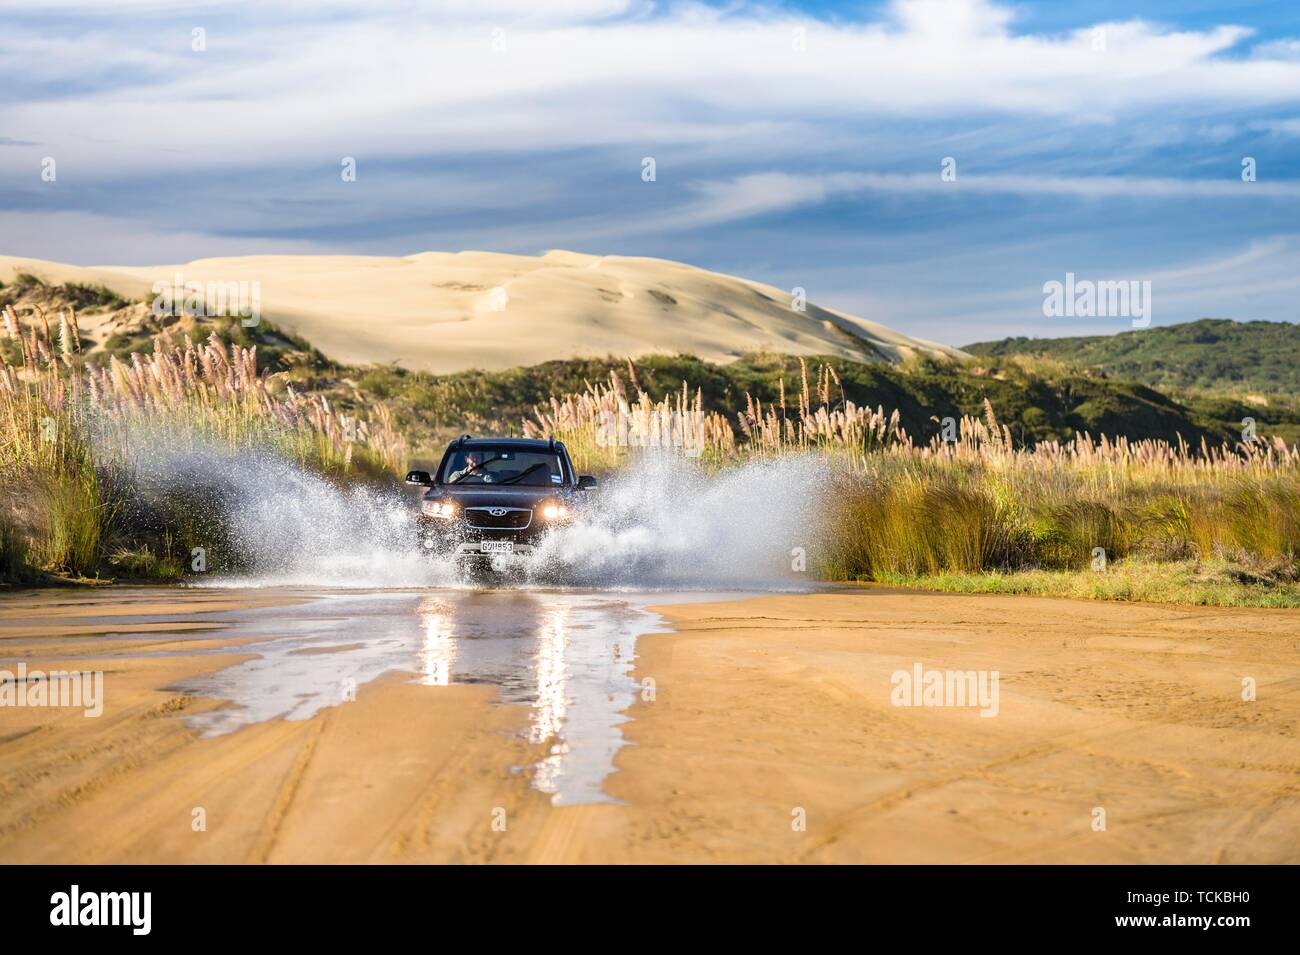 Black Hyundai Santa Fee 4x4 off-road vehicle driving through a streambed on approach to Ninety Mile Beach with sand dune behind, Far North District Stock Photo